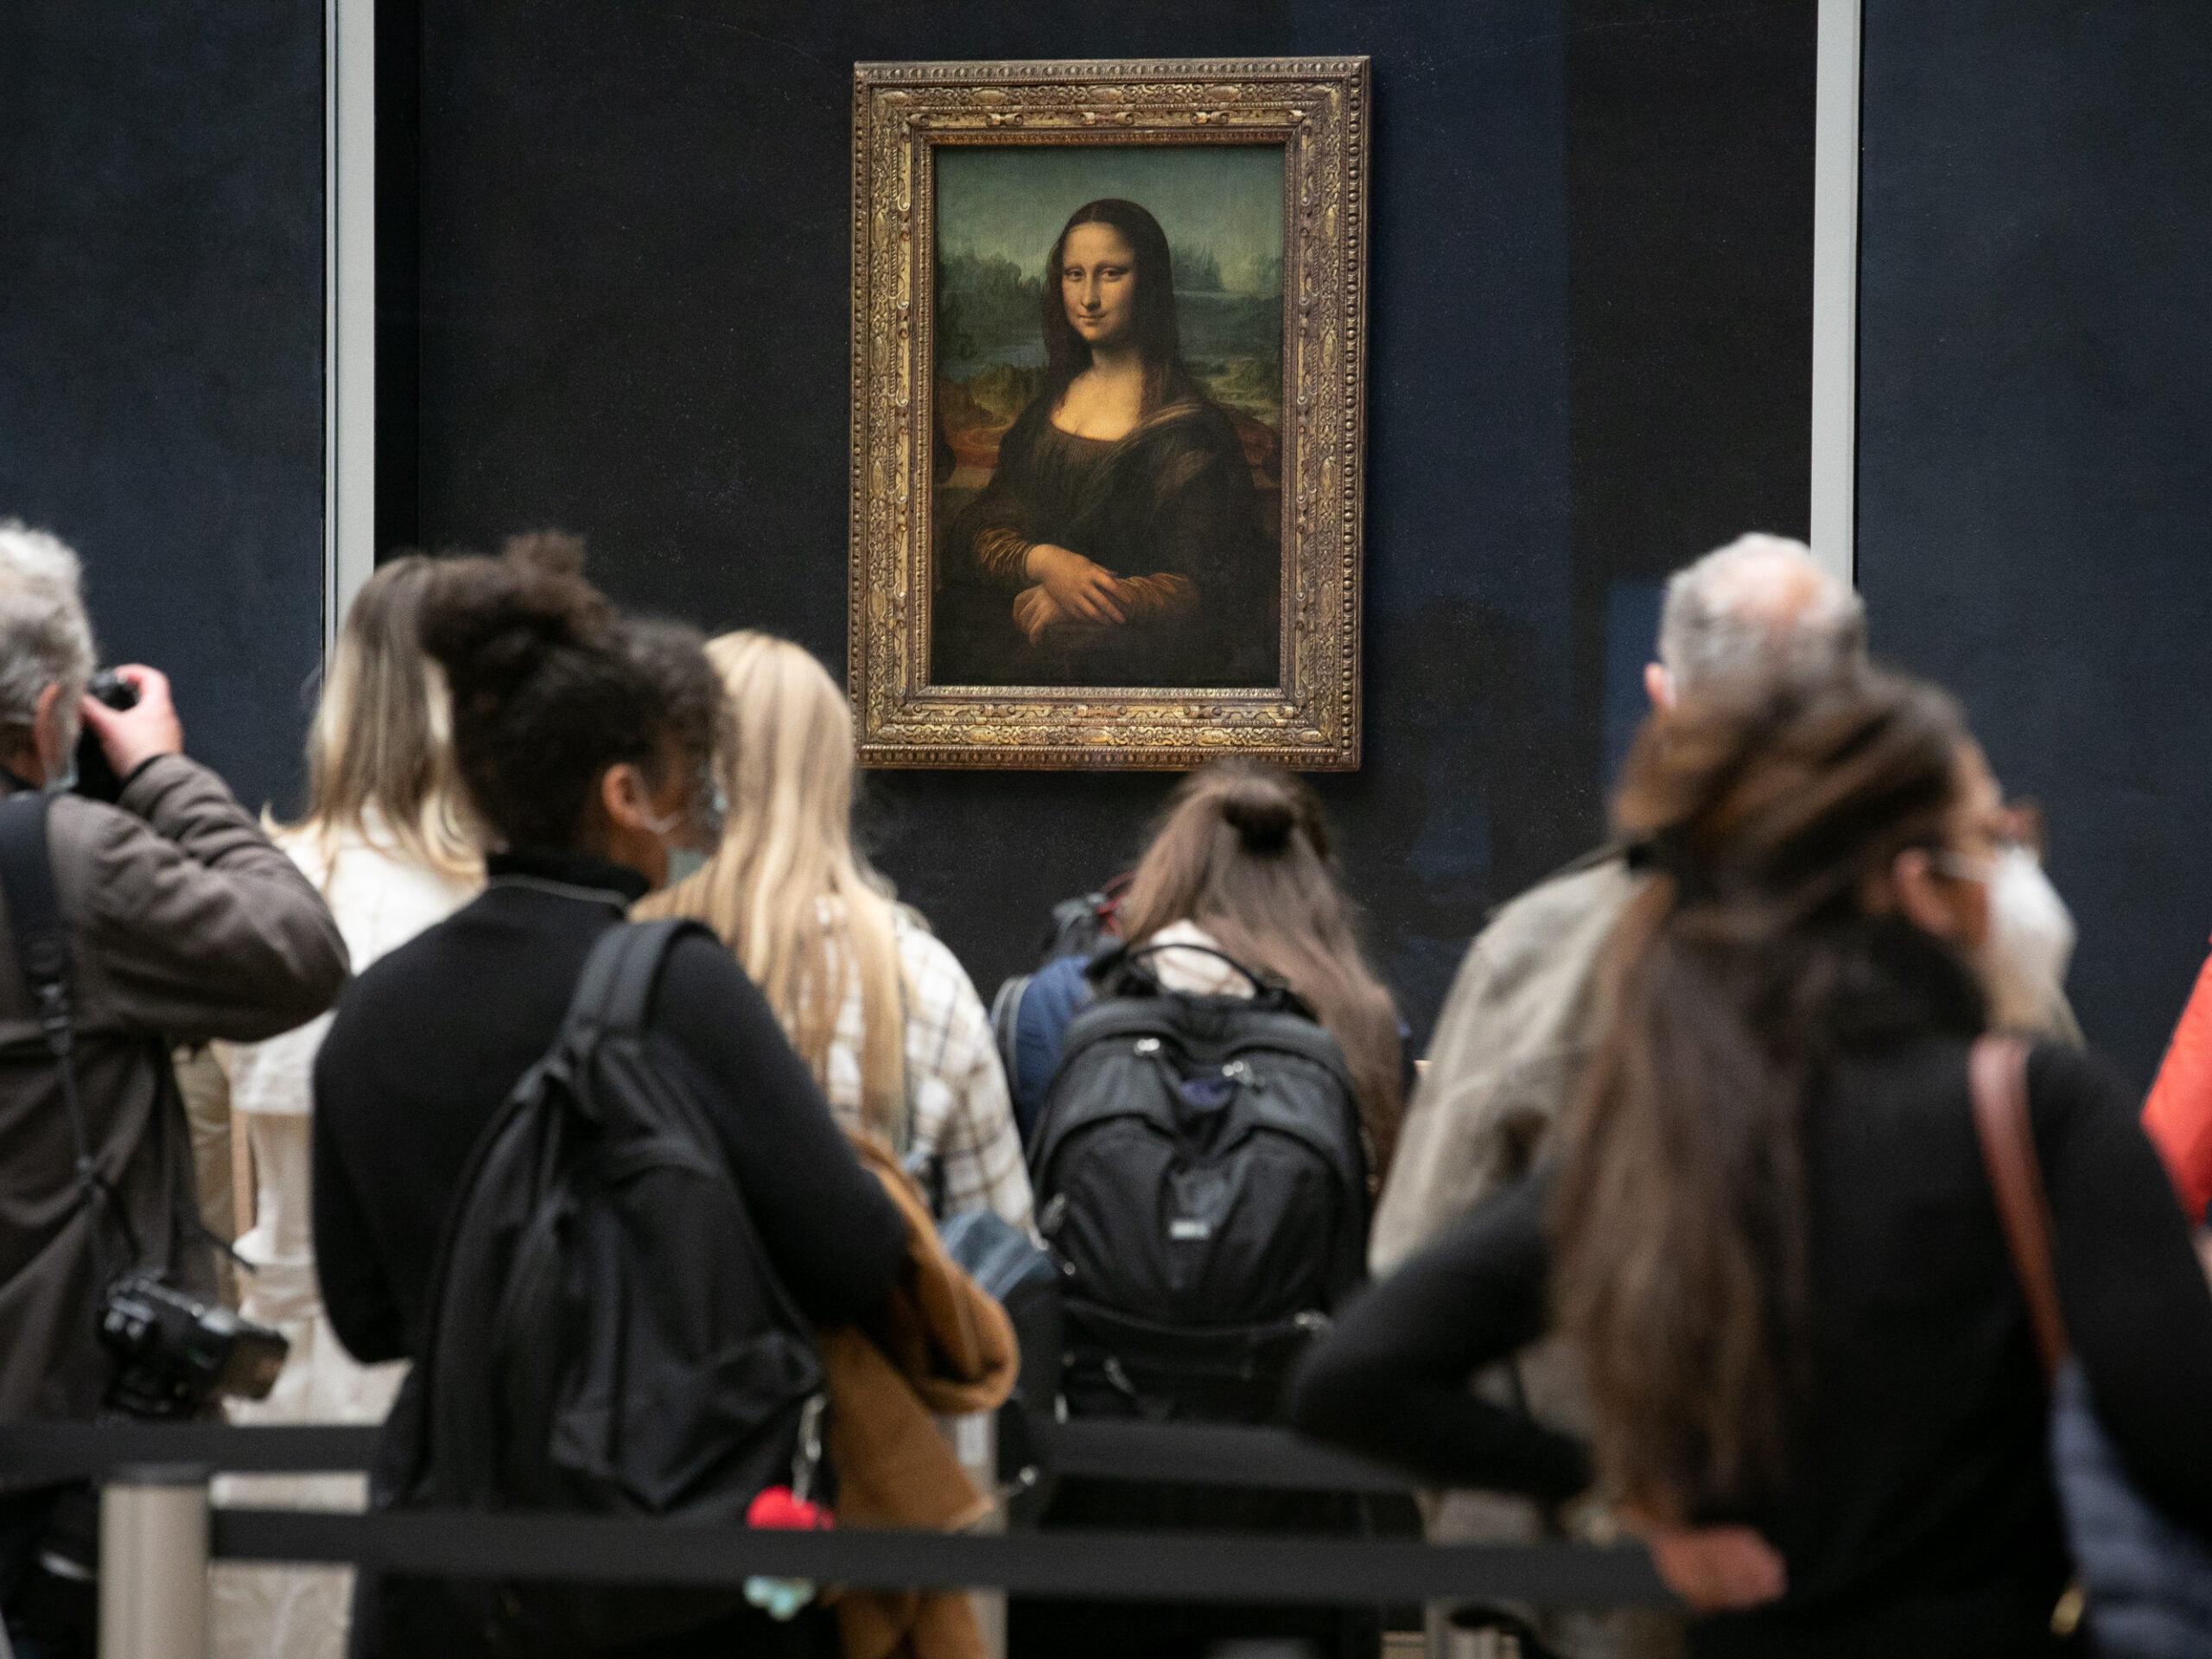 Visitors observe the painting the Mona Lisa by Italian artist Leonardo da Vinci on display in a gallery at Louvre on May 19, 2021 in Paris, France.